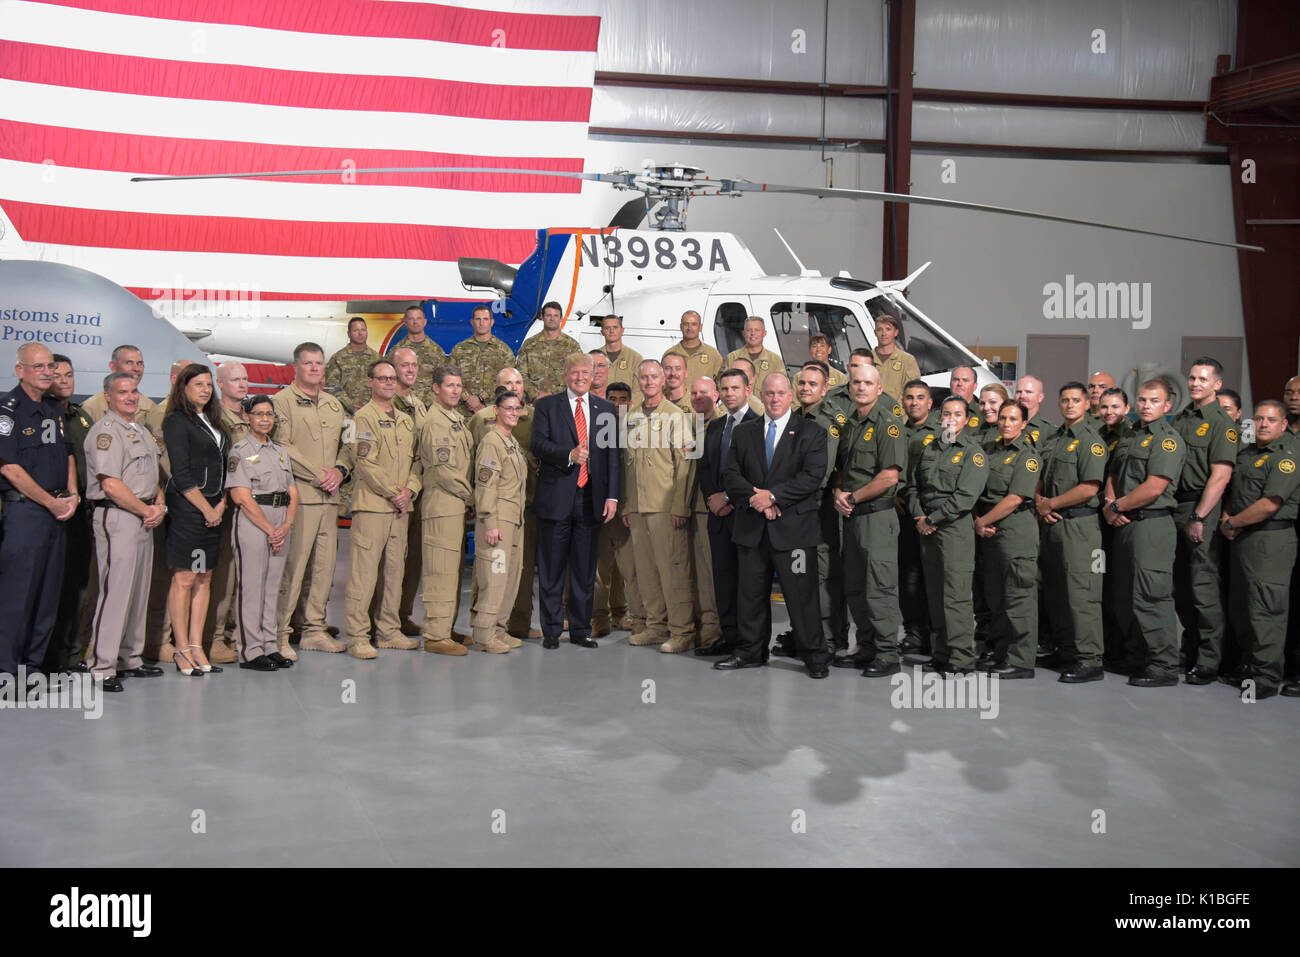 U.S. President Donald Trump poses for a group photo with U.S. Customs and Border Protection and ICE officers during a visit to the Yuma Border Patrol Station August 22, 2017 in Yuma, Arizona. Stock Photo